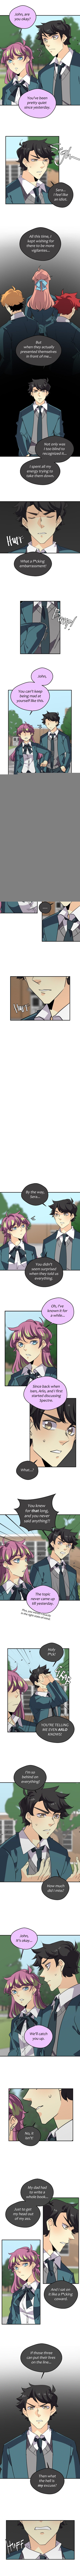 Unordinary Chapter 302 Page 3